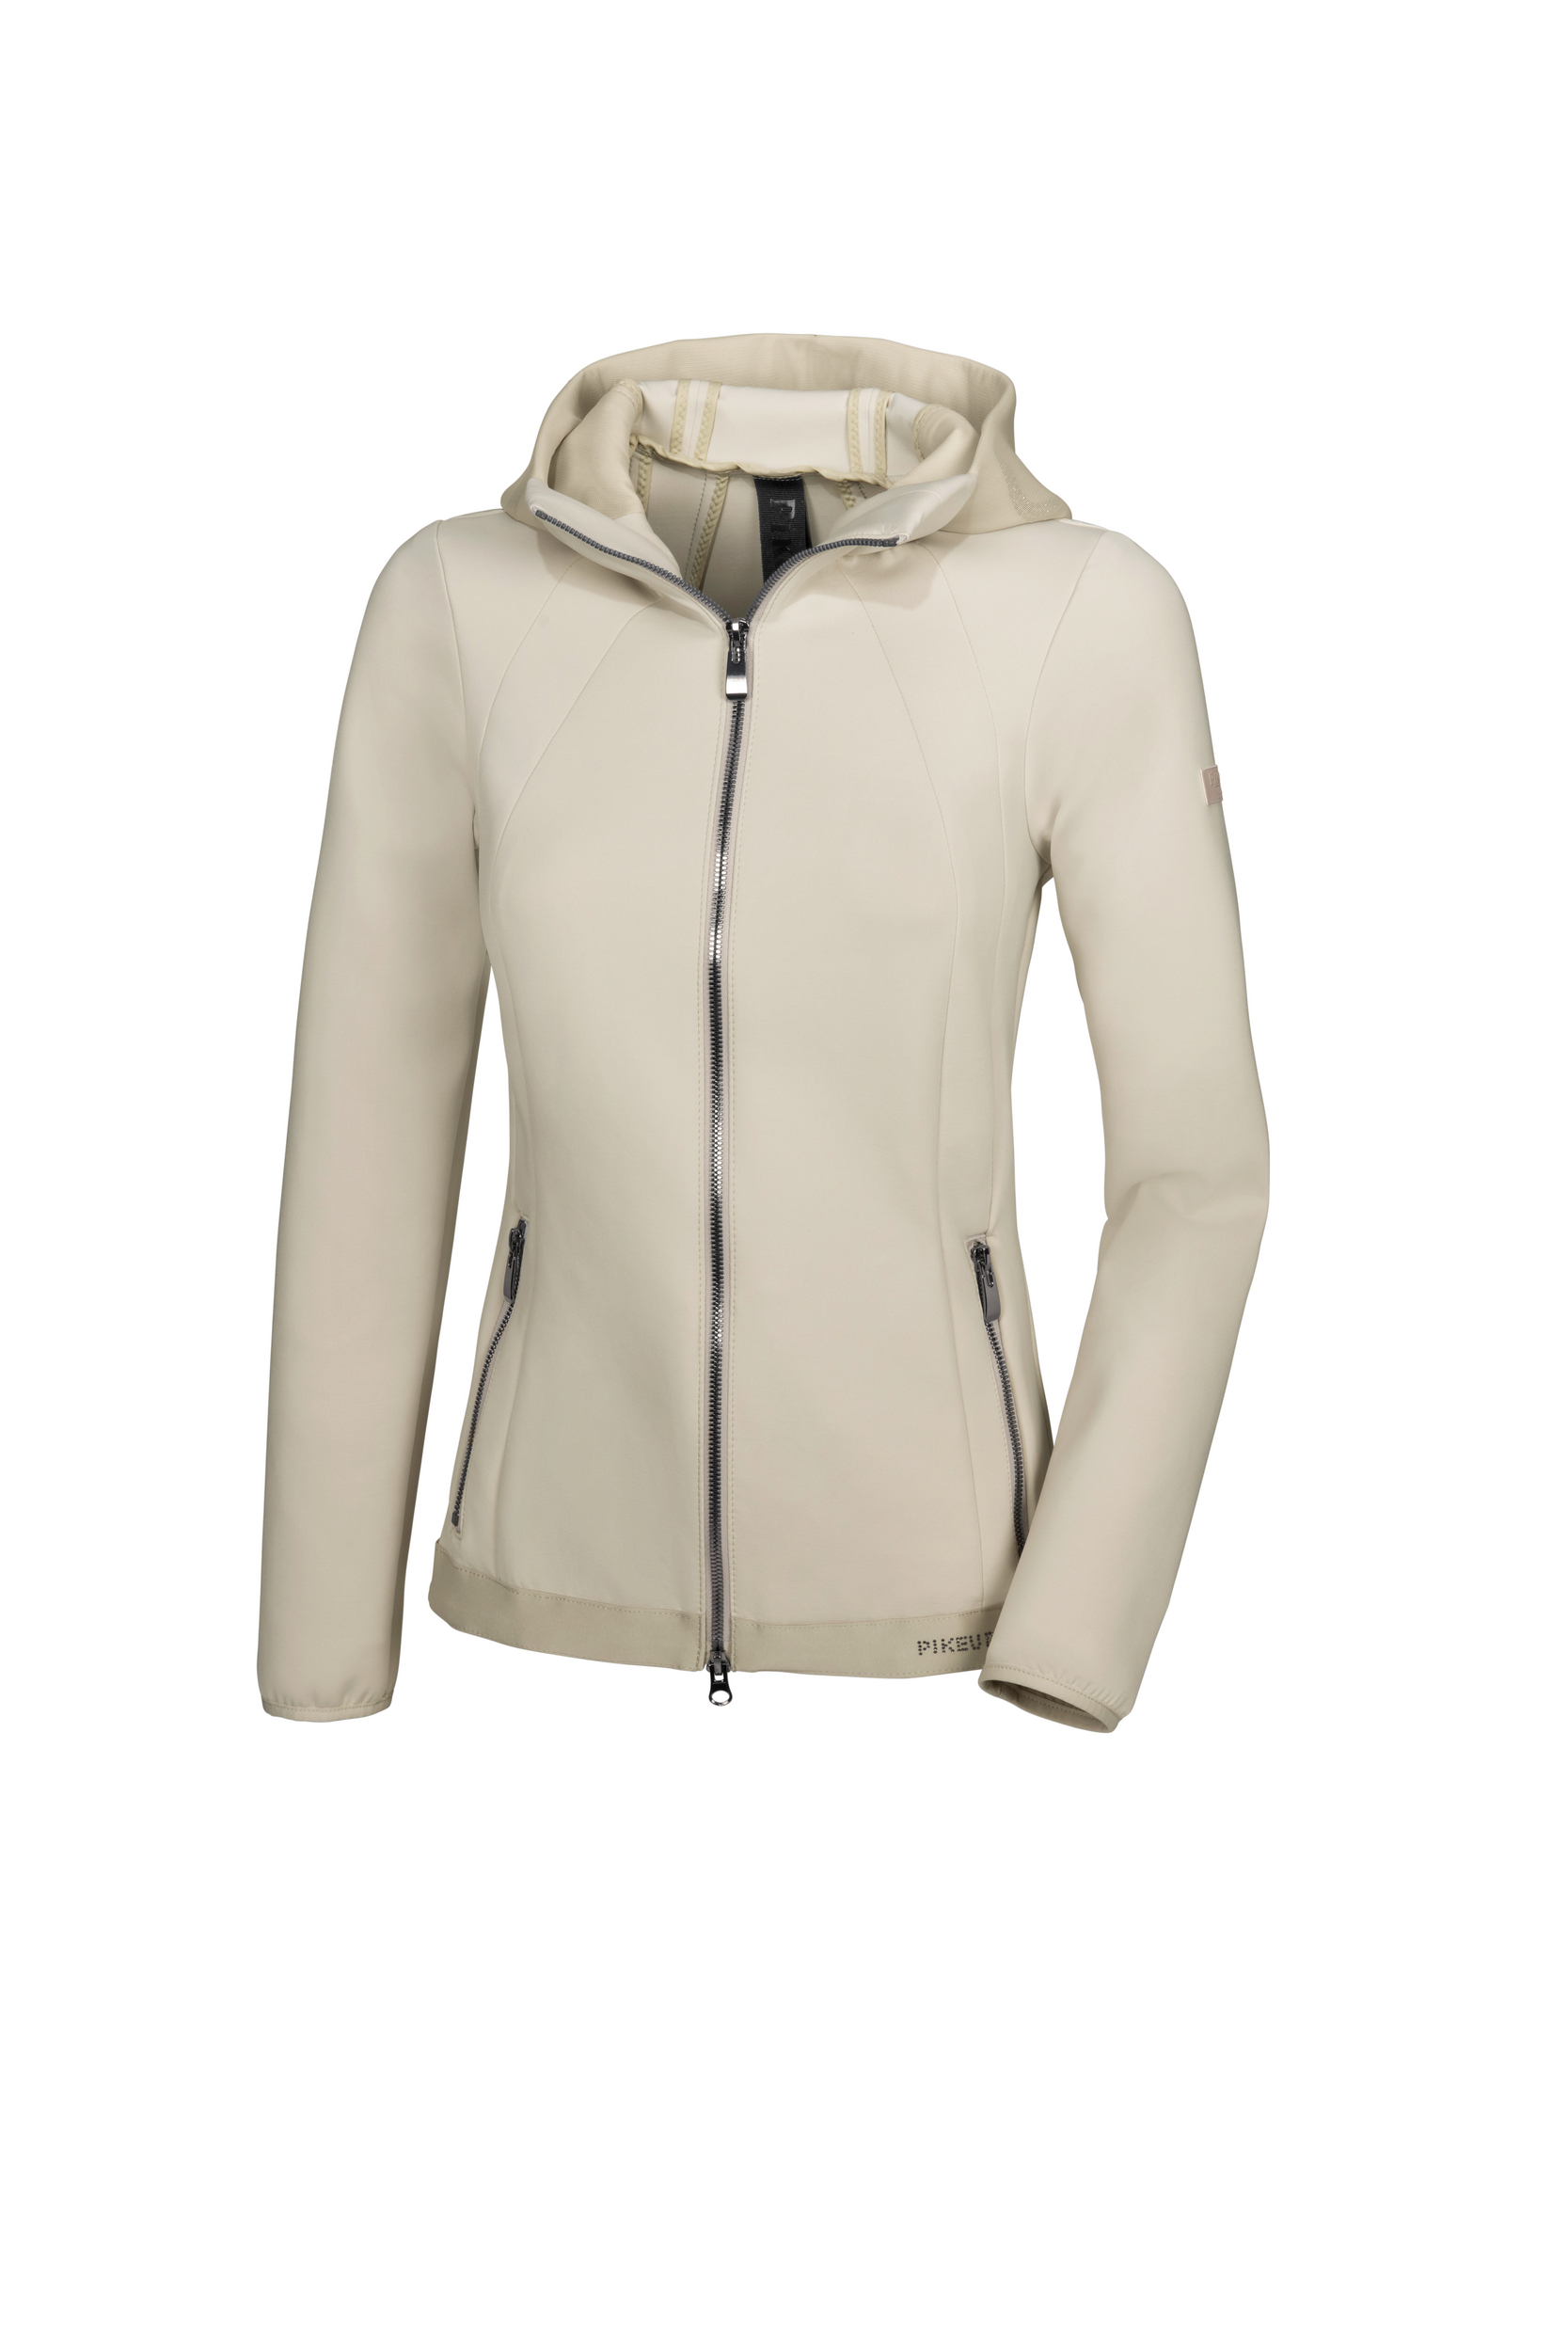 Philine Funktionsjacke Selection FS 22, ivory